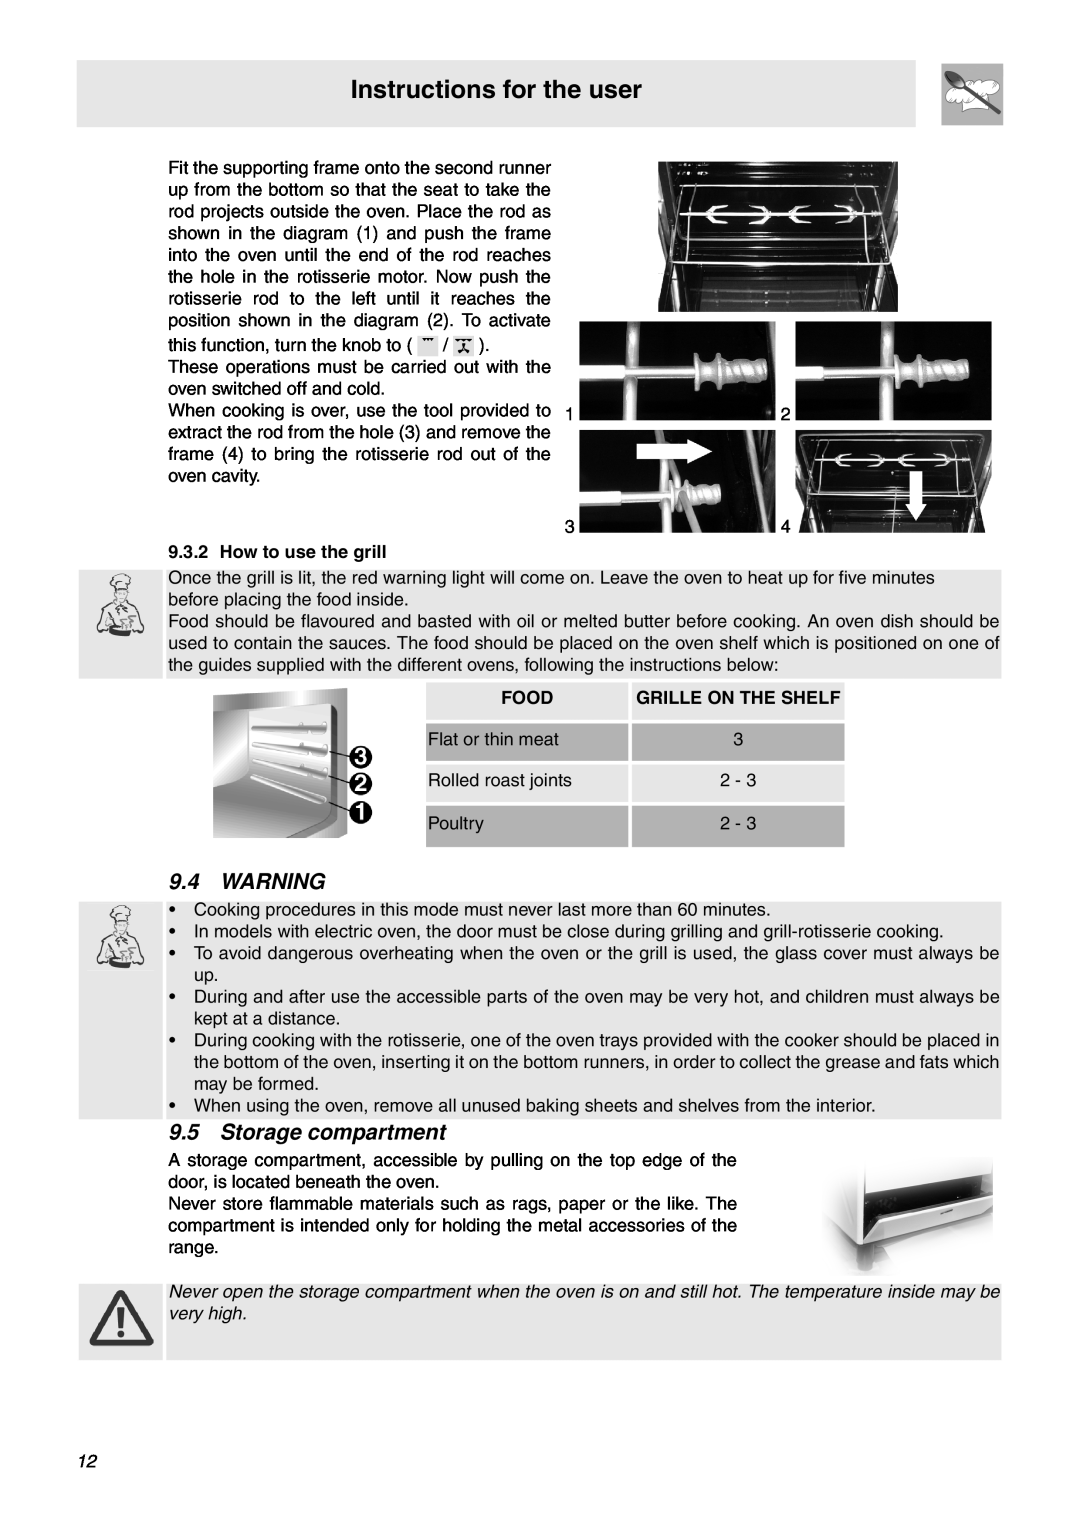 Smeg SNZ106VML manual Storage compartment, Instructions for the user, How to use the grill, Food, Grille On The Shelf 